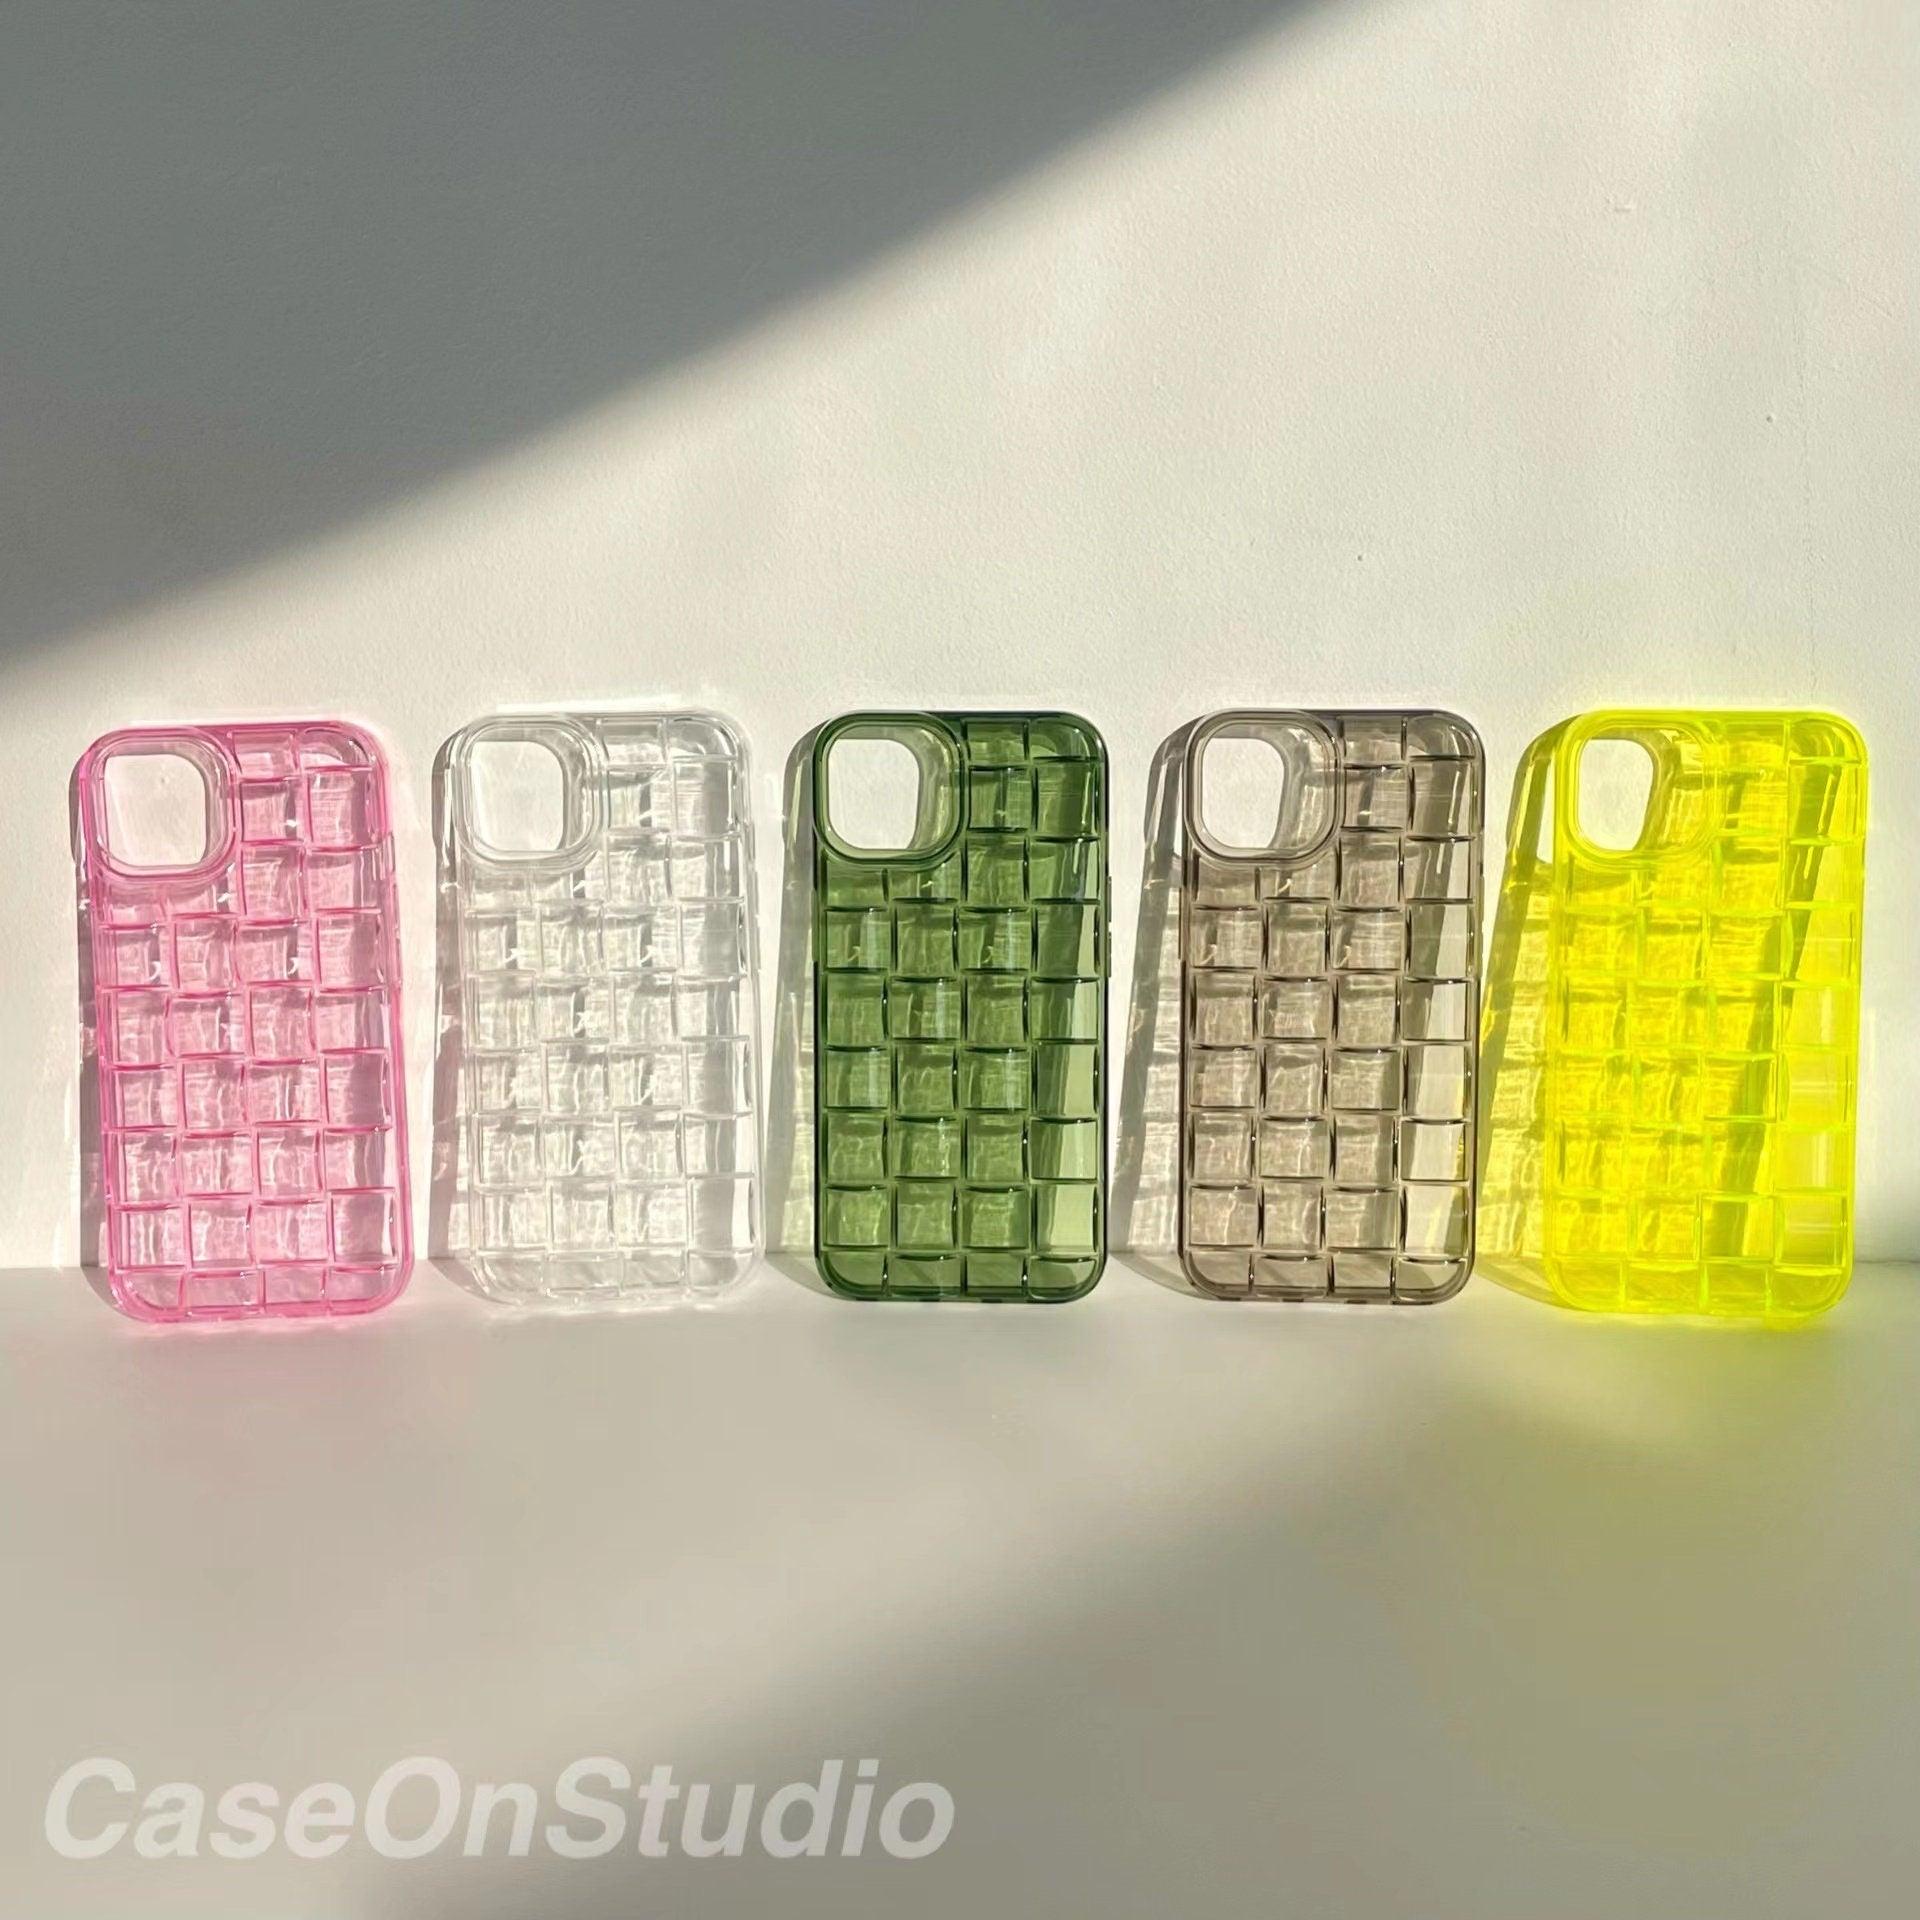 Green Weave Texture iPhone 14 13 12 11 Pro Max case iPhone 13 12 mini case iPhone XS Max Case iPhone XR iPhone 7 8 14 Plus iPhone SE Case - Decotree.co Online Shop